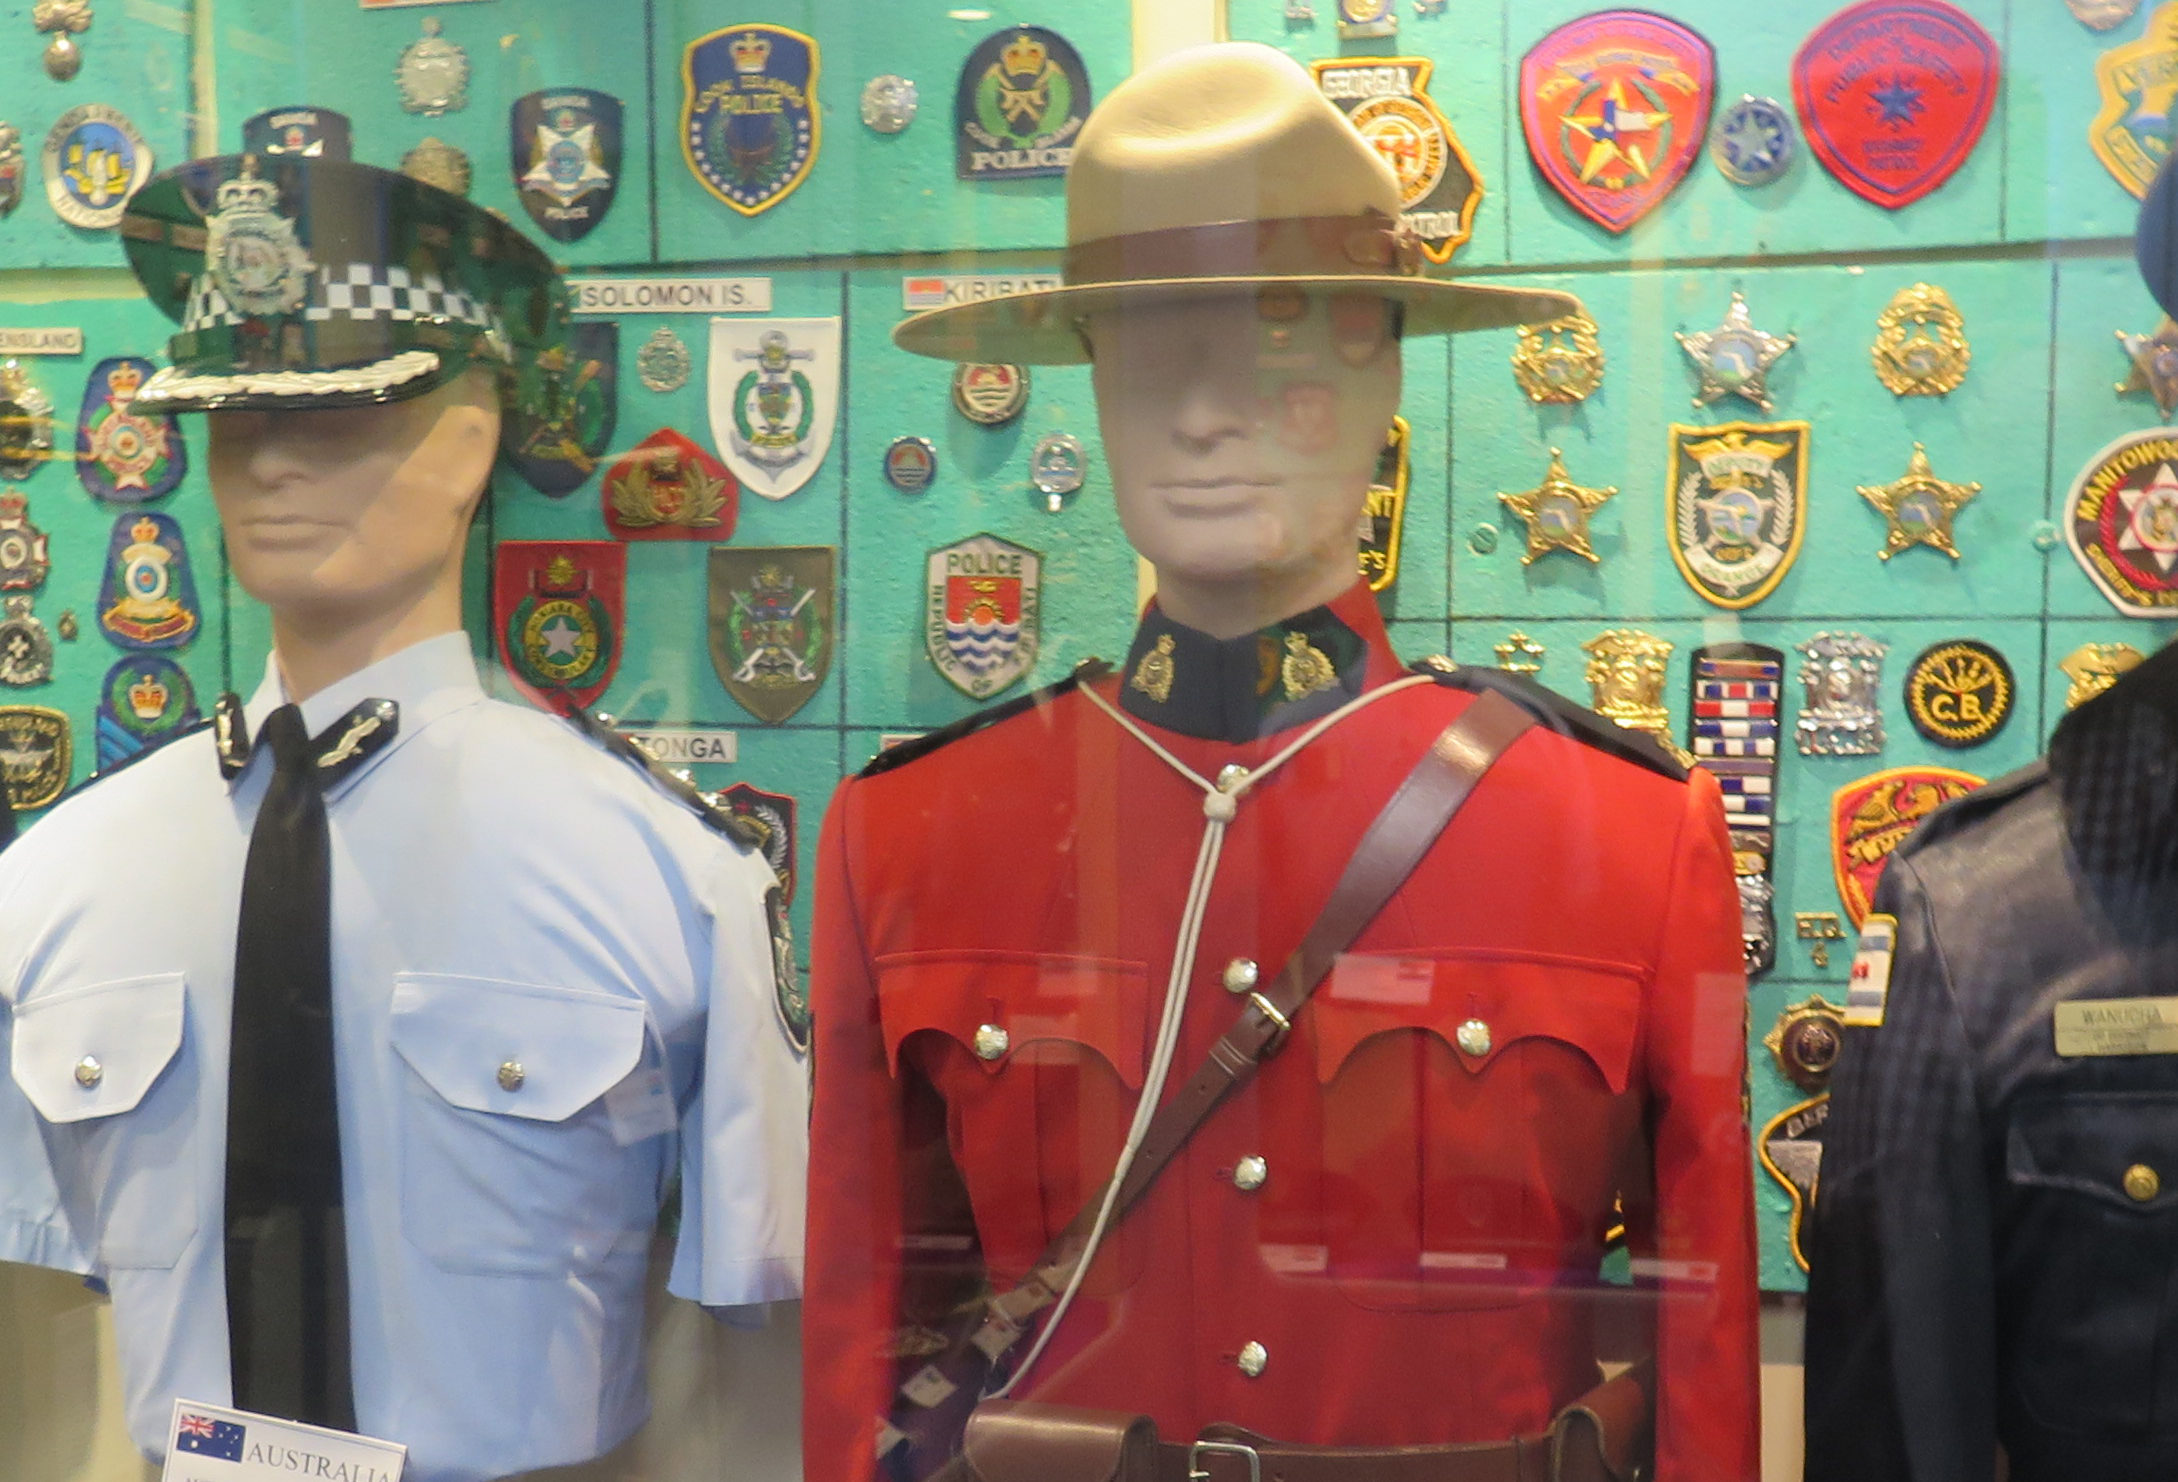 Glasgow Police Museum reveals the many firsts for the city’s force, along with Europe’s largest collection of foreign police uniforms